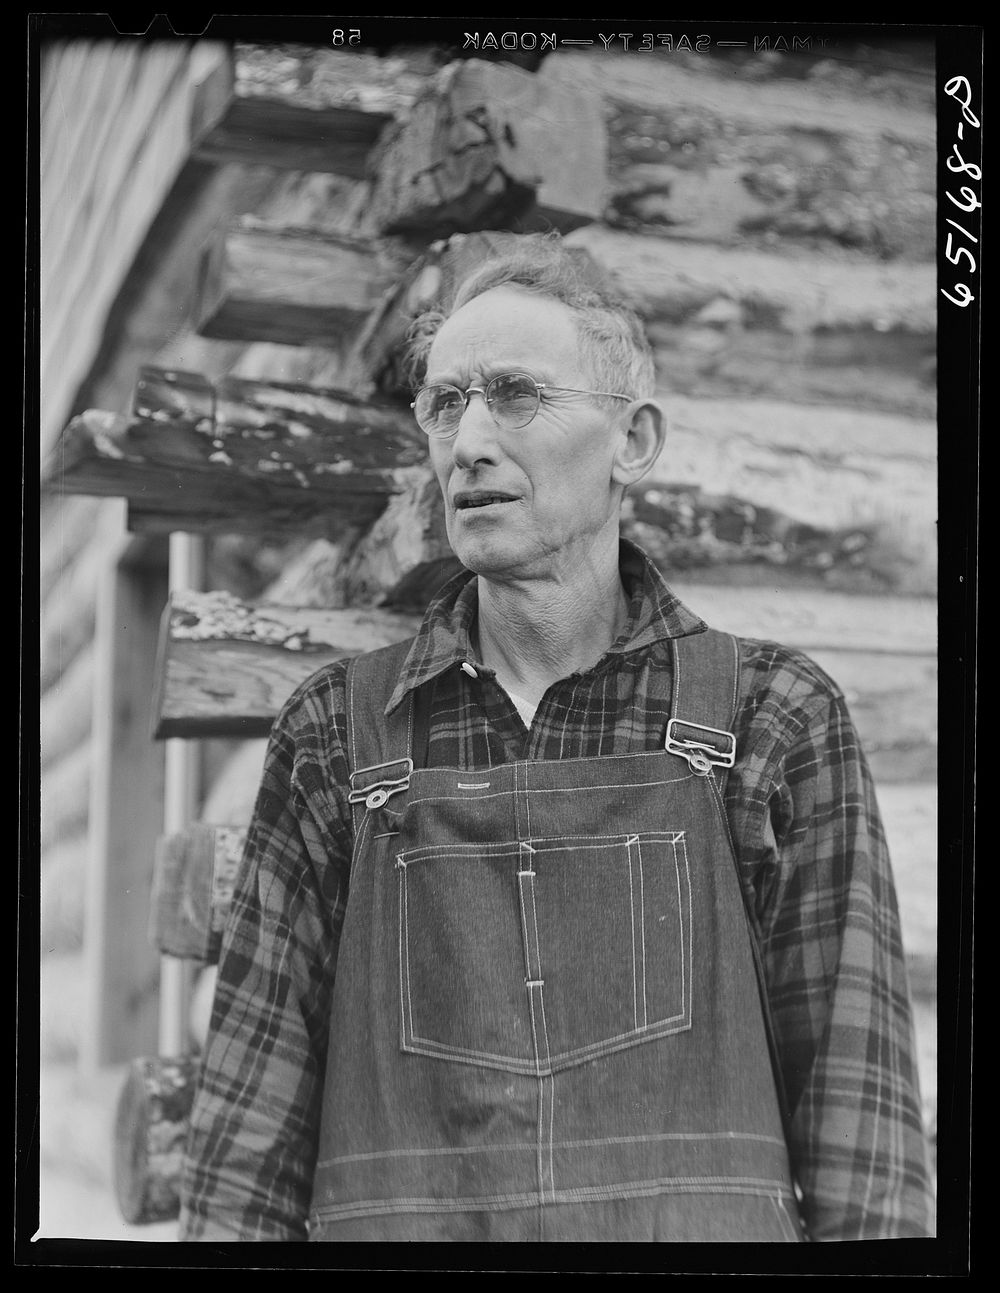 Flathead Valley special area project, Montana. Delbert Comstock, FSA (Farm Security Administration) borrower. Sourced from…